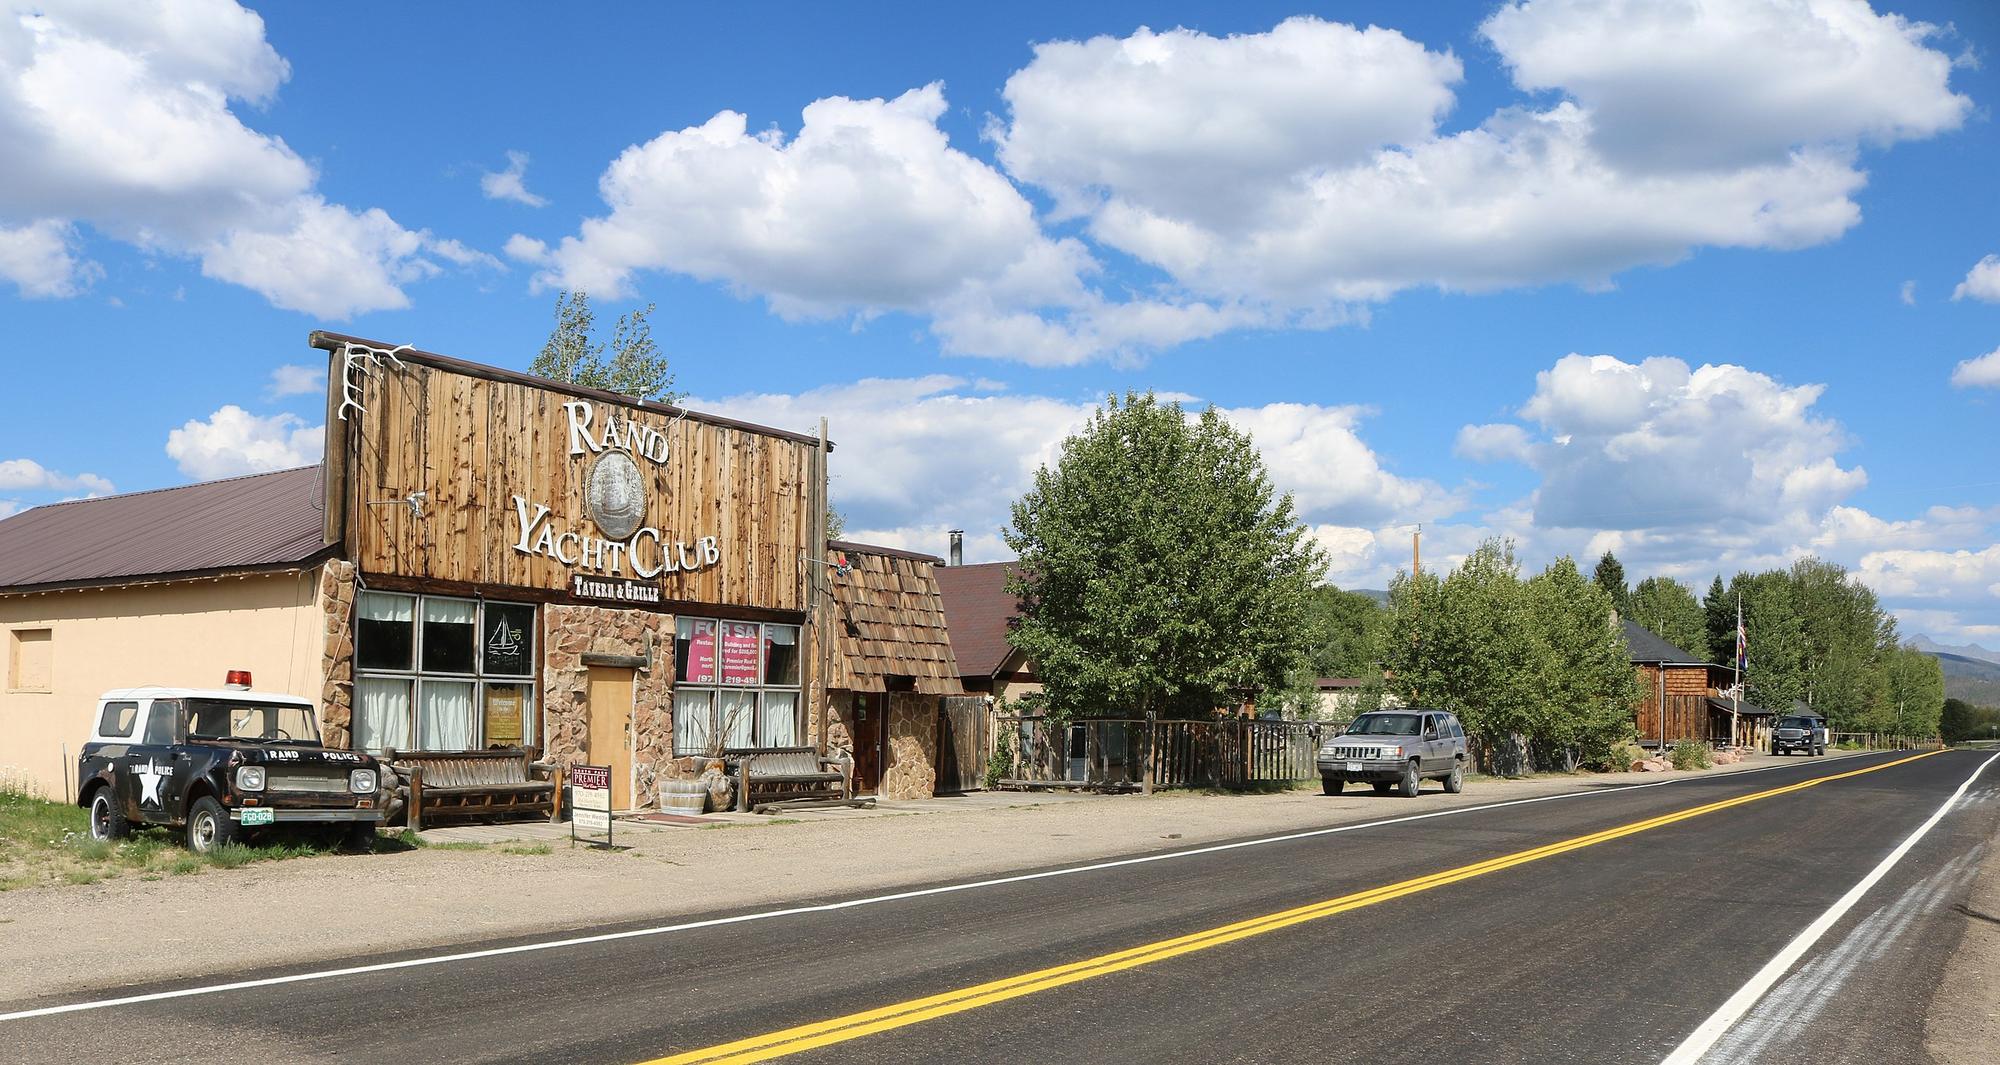 An exterior of a building with a sign that reads Rand Yacht Club Tavern & Grille - a for sale sign is visible in the window. An old fashioned police car is parked next to it. A highway stretches in the foreground - North Park, Jackson County Colorado